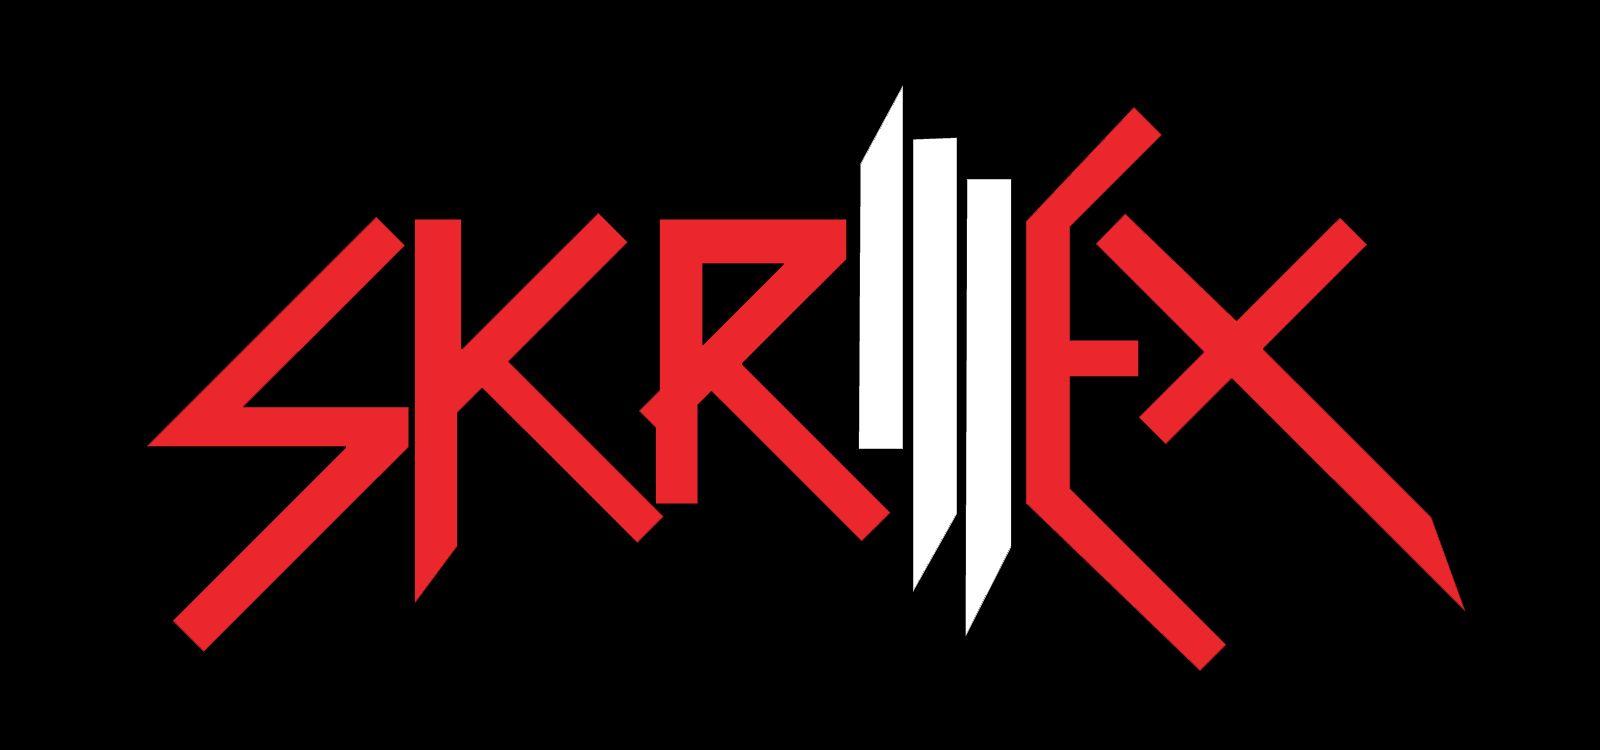 Skrillex Logo - Skrillex Logo, Skrillex Symbol, Meaning, History and Evolution